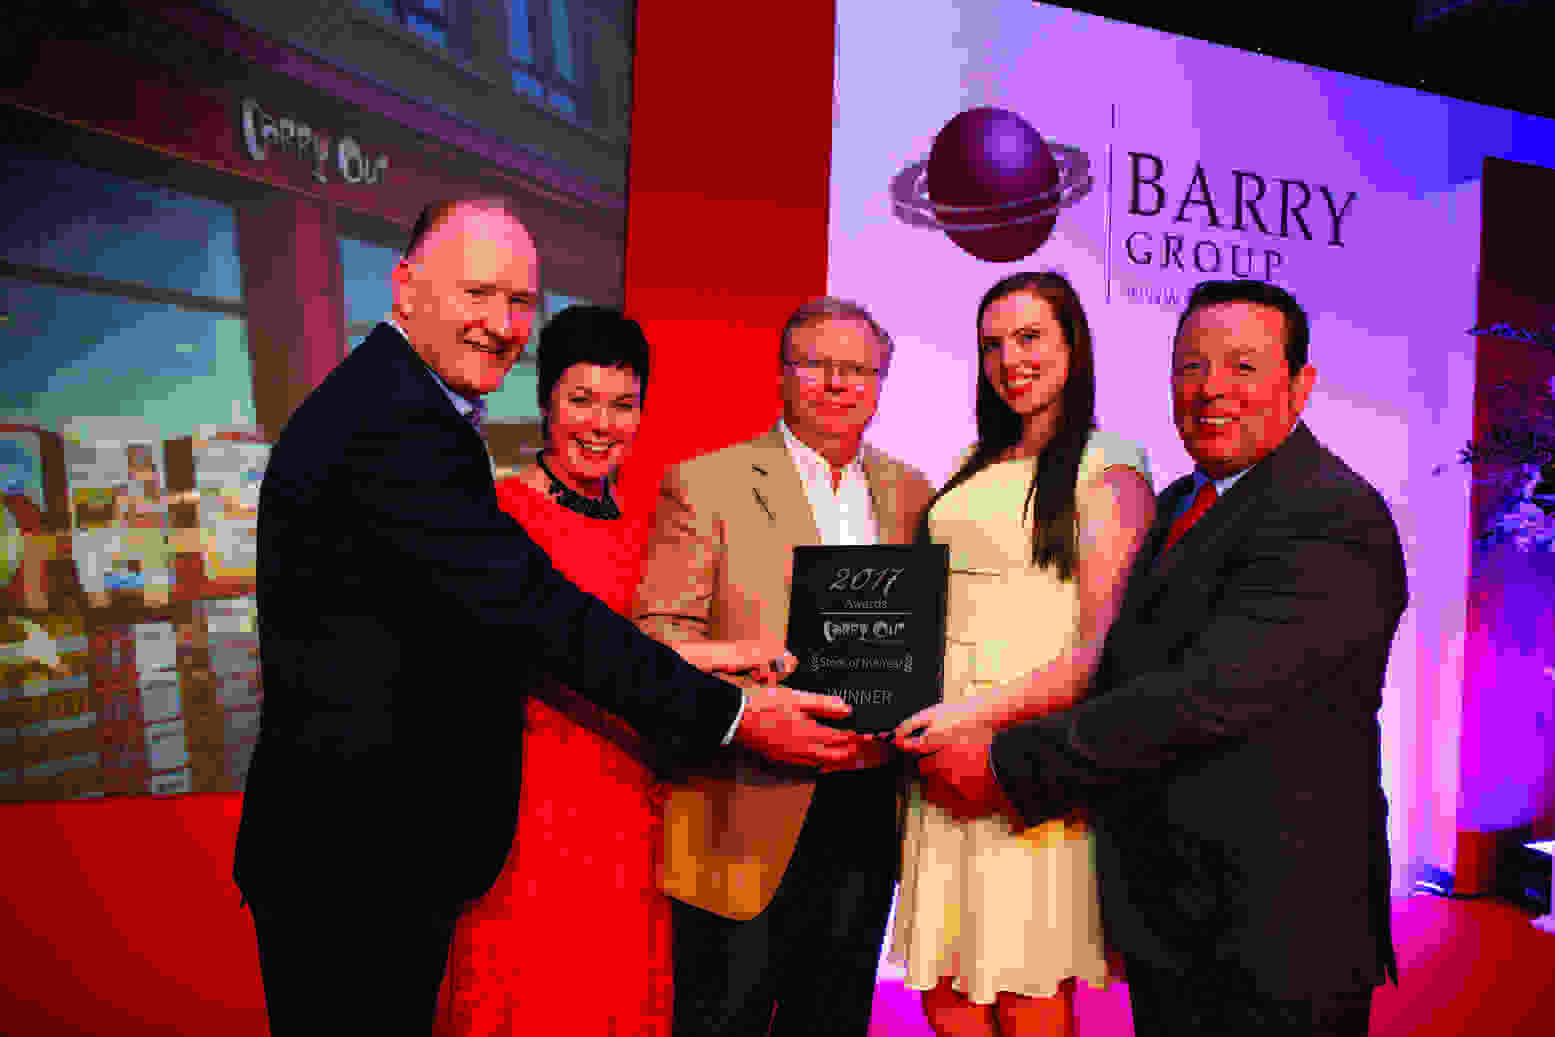 From left: Barry Group Managing Director Jim Barry, Barry Group Sales Director Edwina Lucey, Kevin O’Brien & daughter Caoimhe O’Brien of Carry Out, Tyrellstown, who accepted the Overall Award for the Carry Out Store of the year, with Carry Out’s Head of Sales David O’Keeffe.